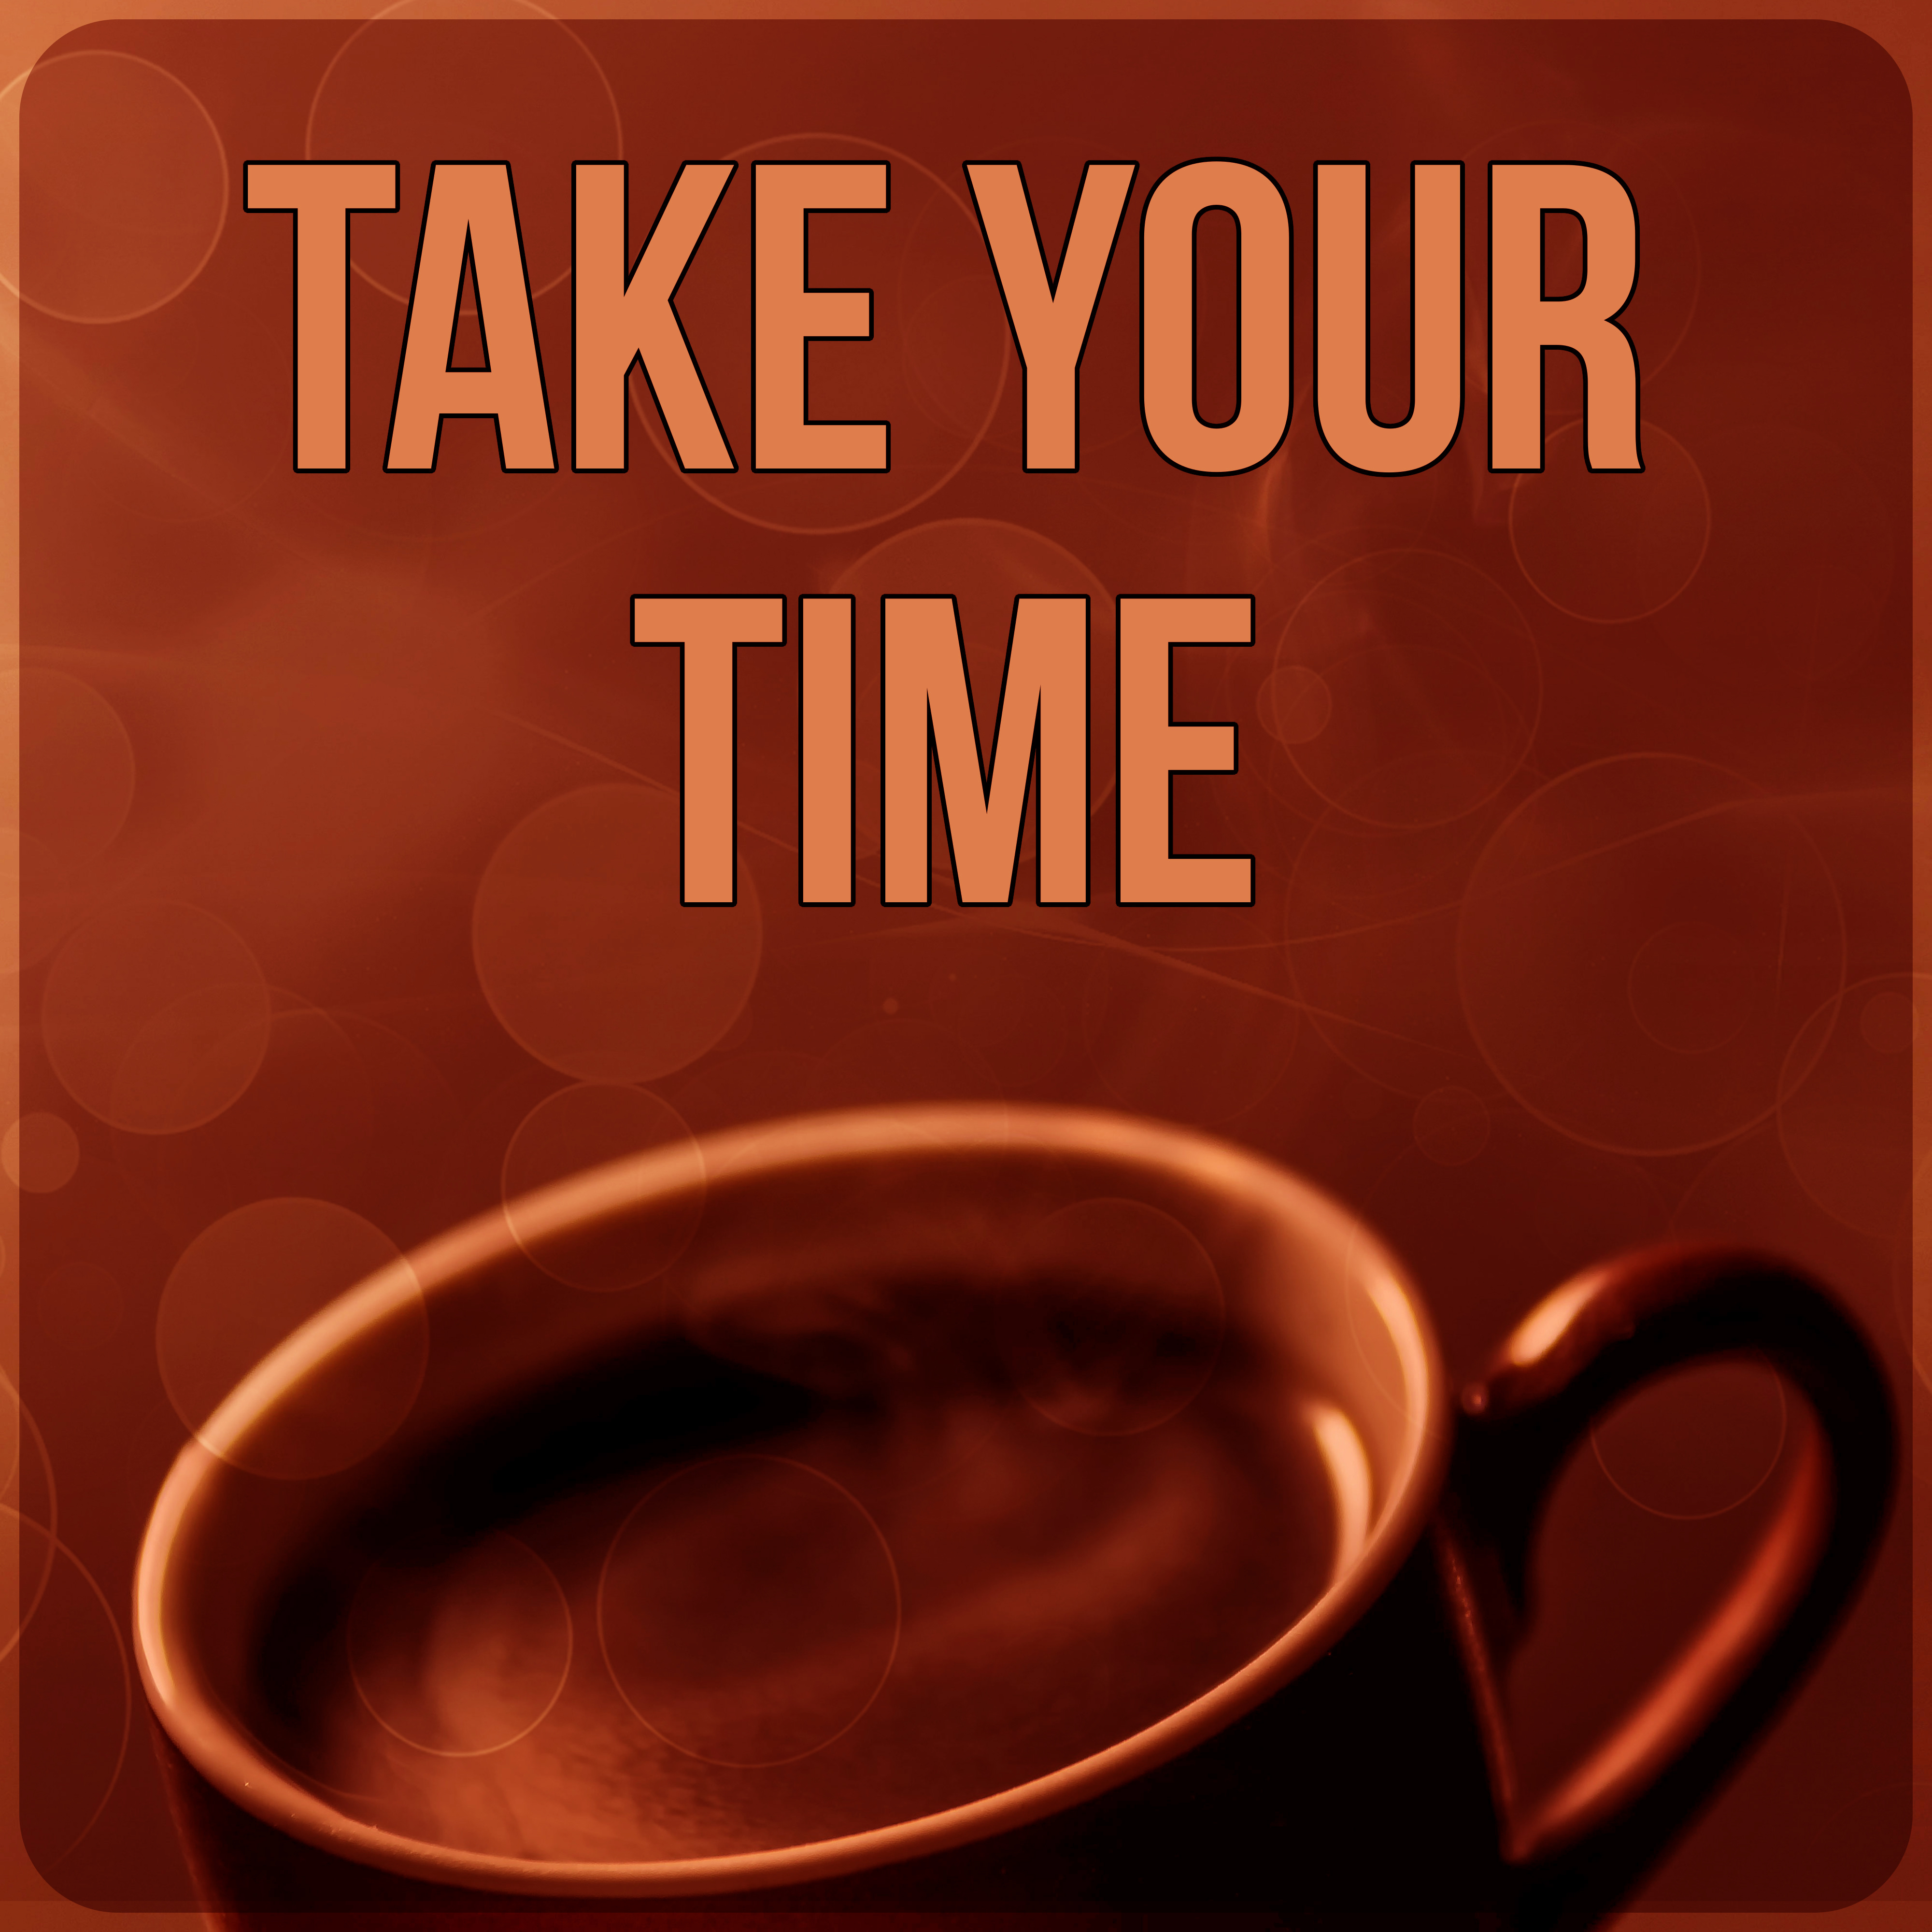 Take Your Time - Waiting Room, Soothing Sounds for Work to Reduce Stress, Mental Stimulation at Workplace